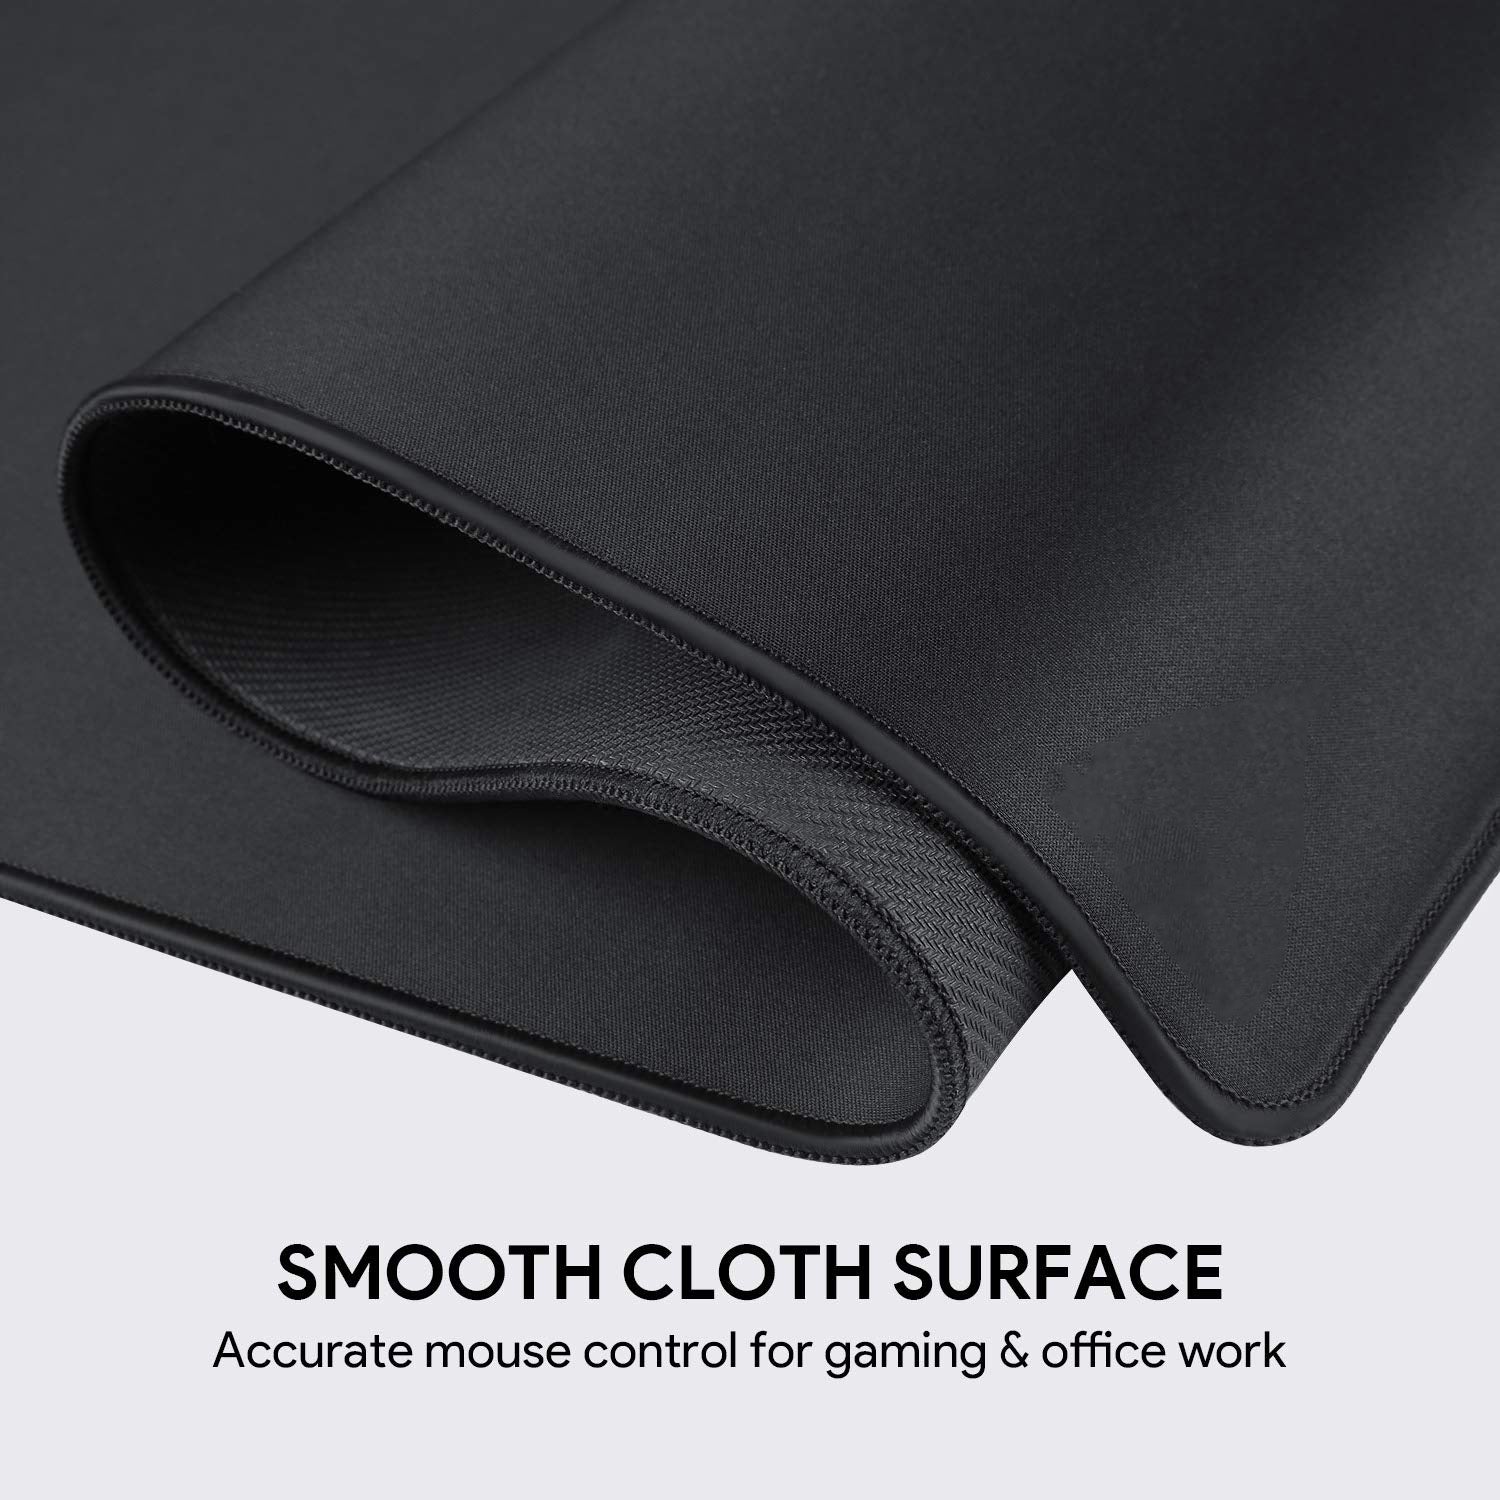 smooth desk mat with dark wolf design, bring a new look on your pc desk gamer setup, accurate mouse control desk mat for gaming and office work